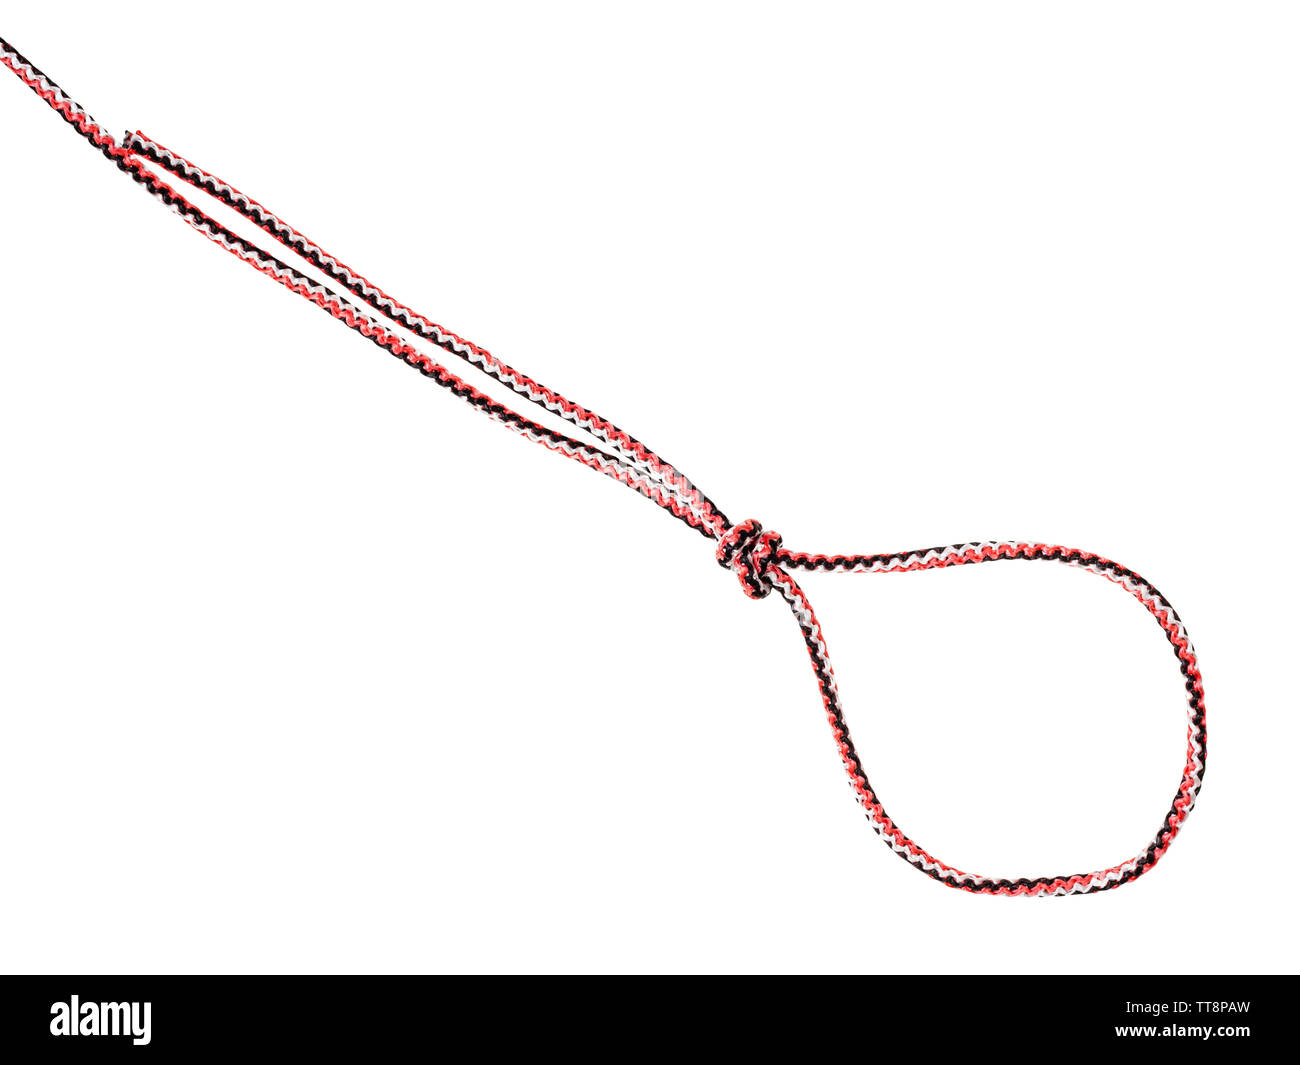 another side of strangle snare knot tied on synthetic rope cut out on white background Stock Photo